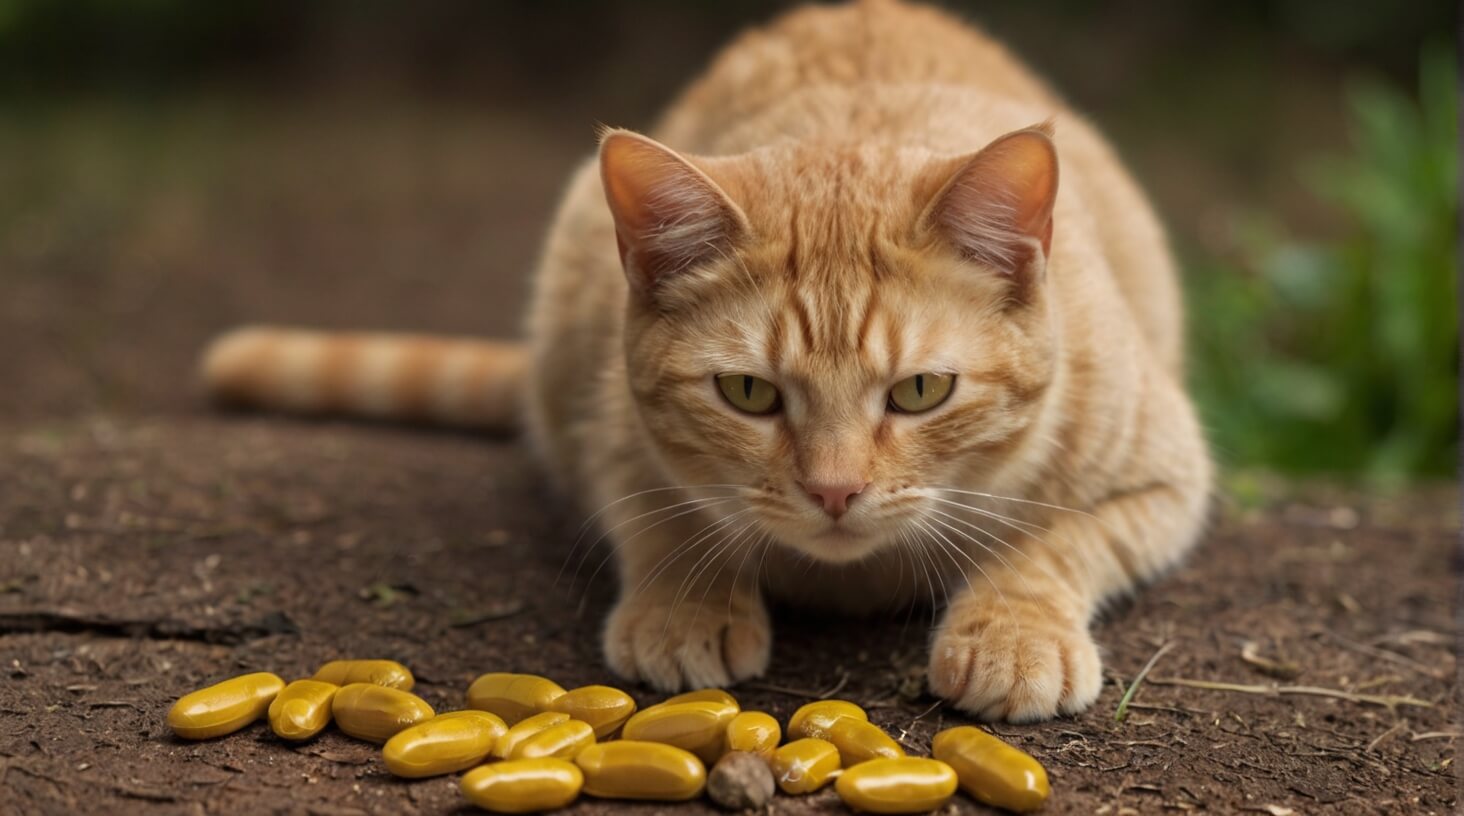 A person holding a bottle of Cat's Claw supplements,